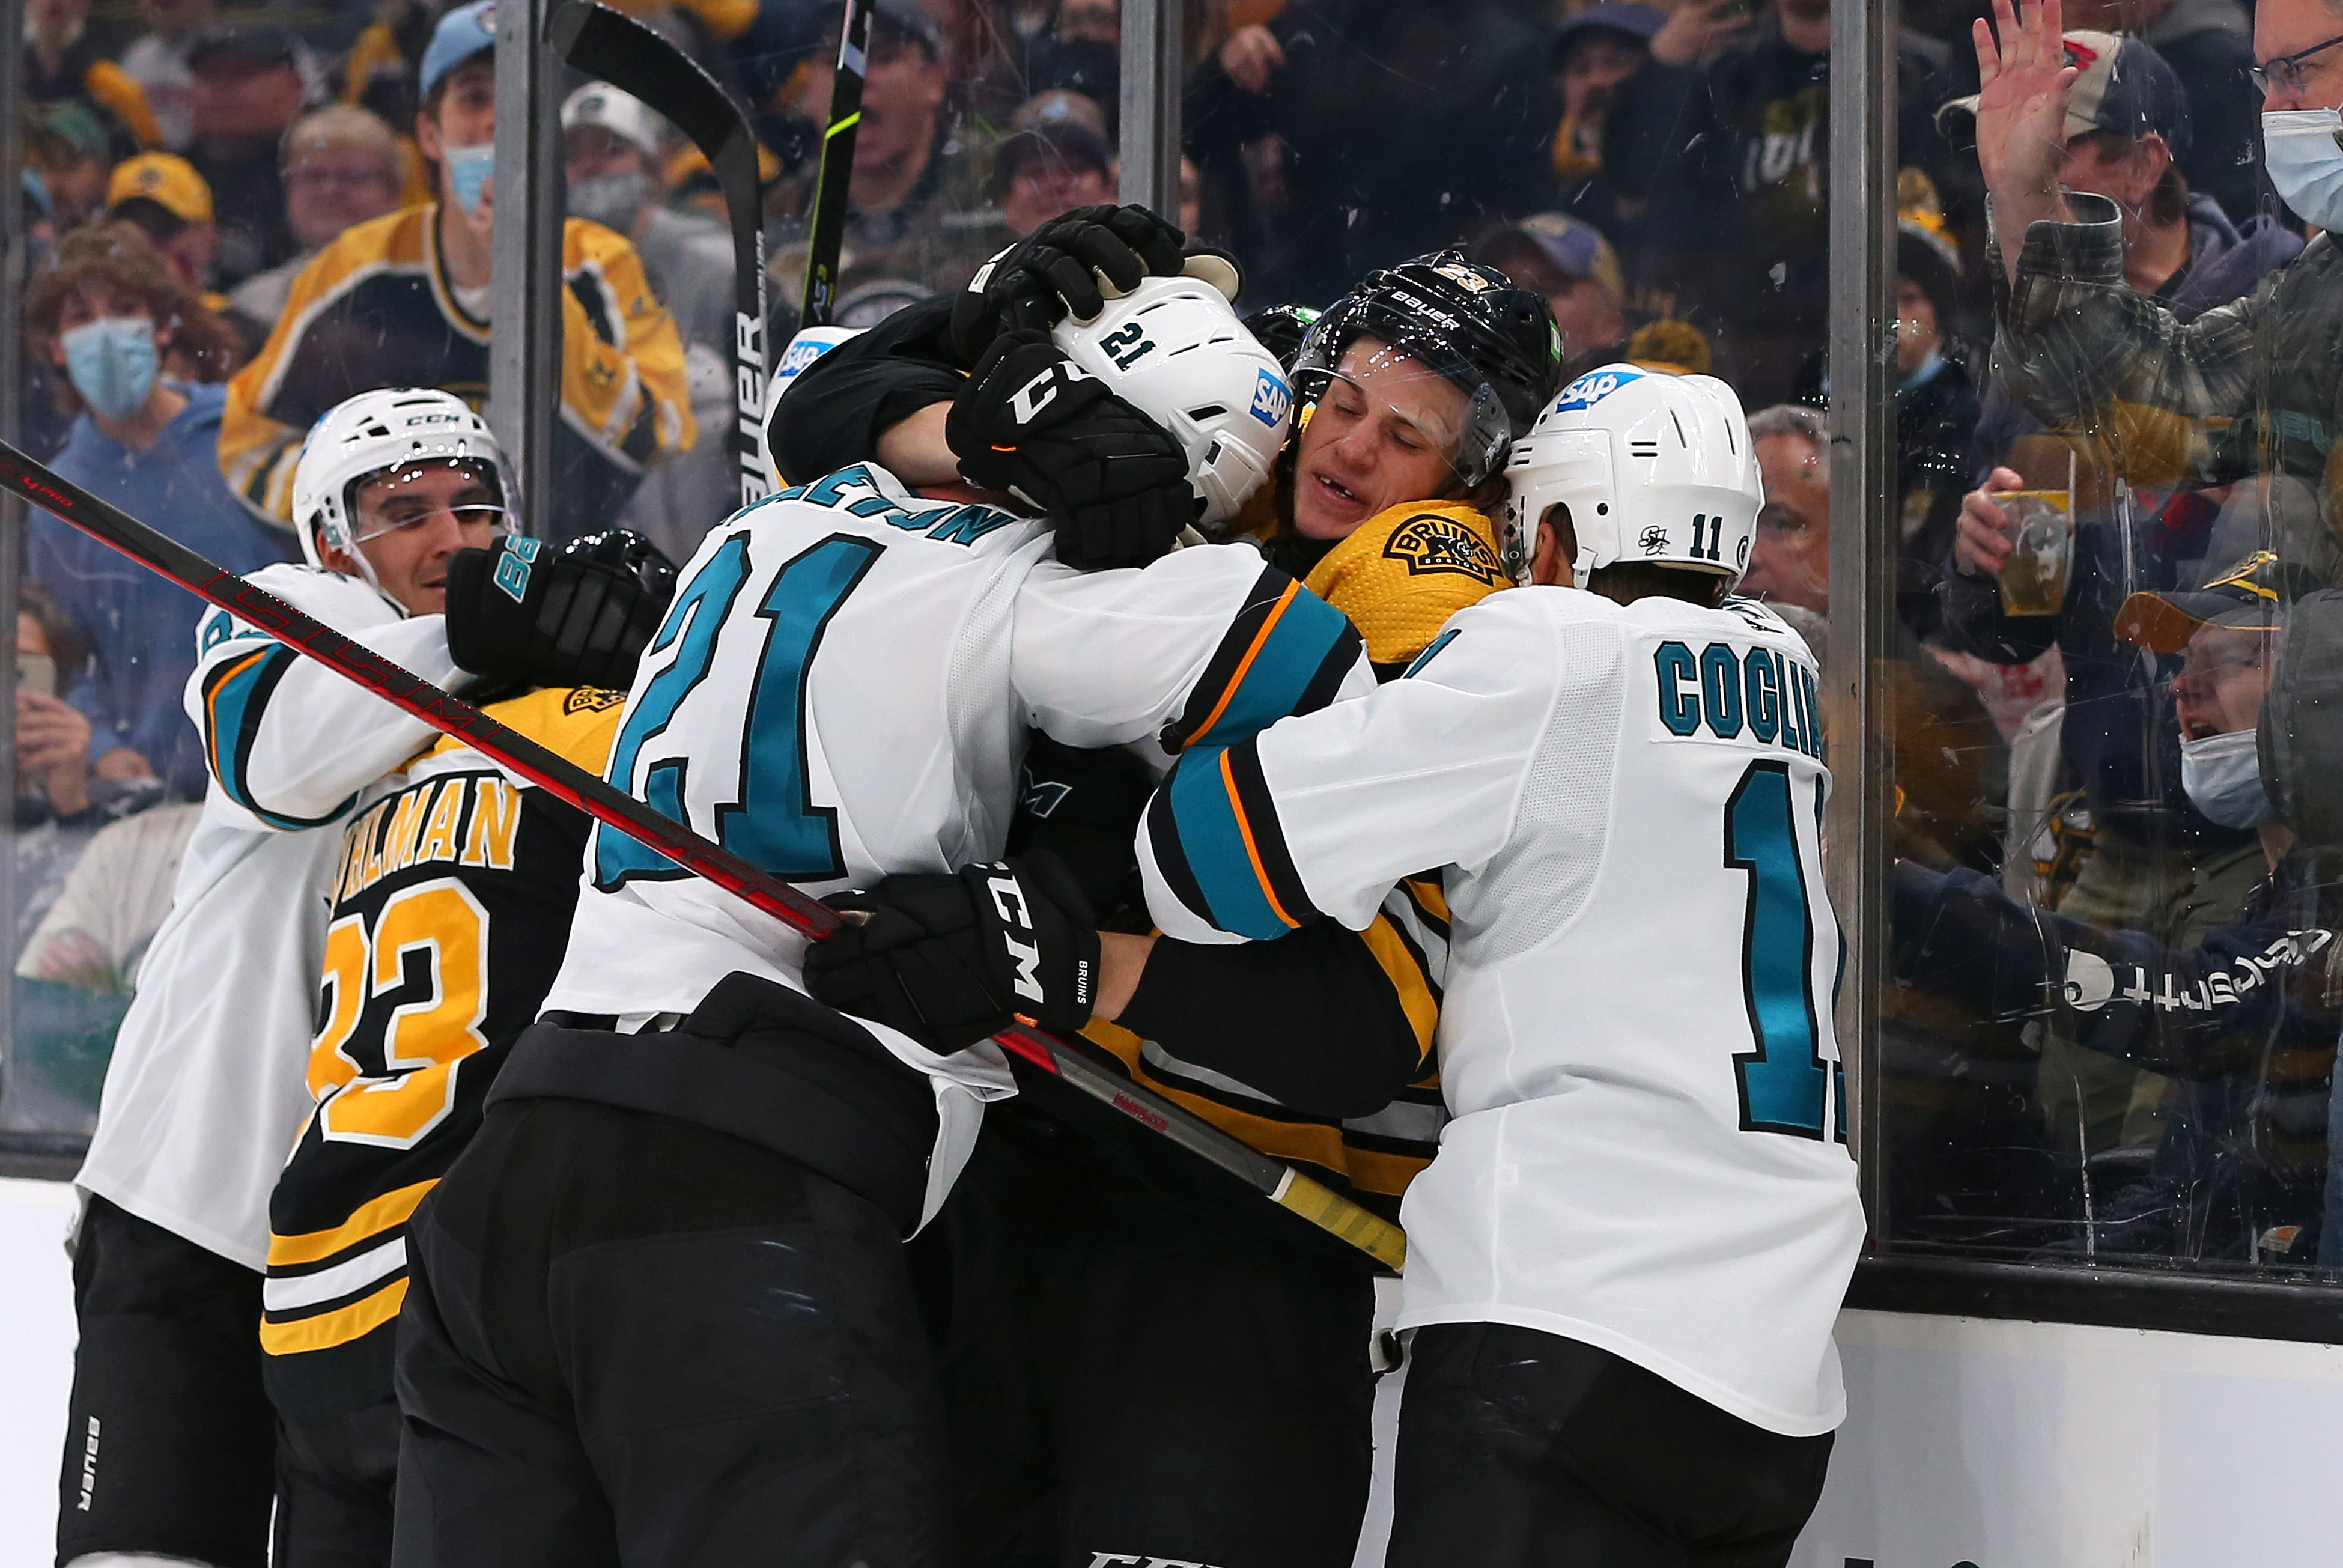 San Jose Sharks defenseman Jacob Middleton (21) and Boston Bruins left wing Trent Frederic (11) shove one another during a NHL game between San Jose Sharks and Boston Bruins on October 24, 2021, at TD Garden in Boston, MA.